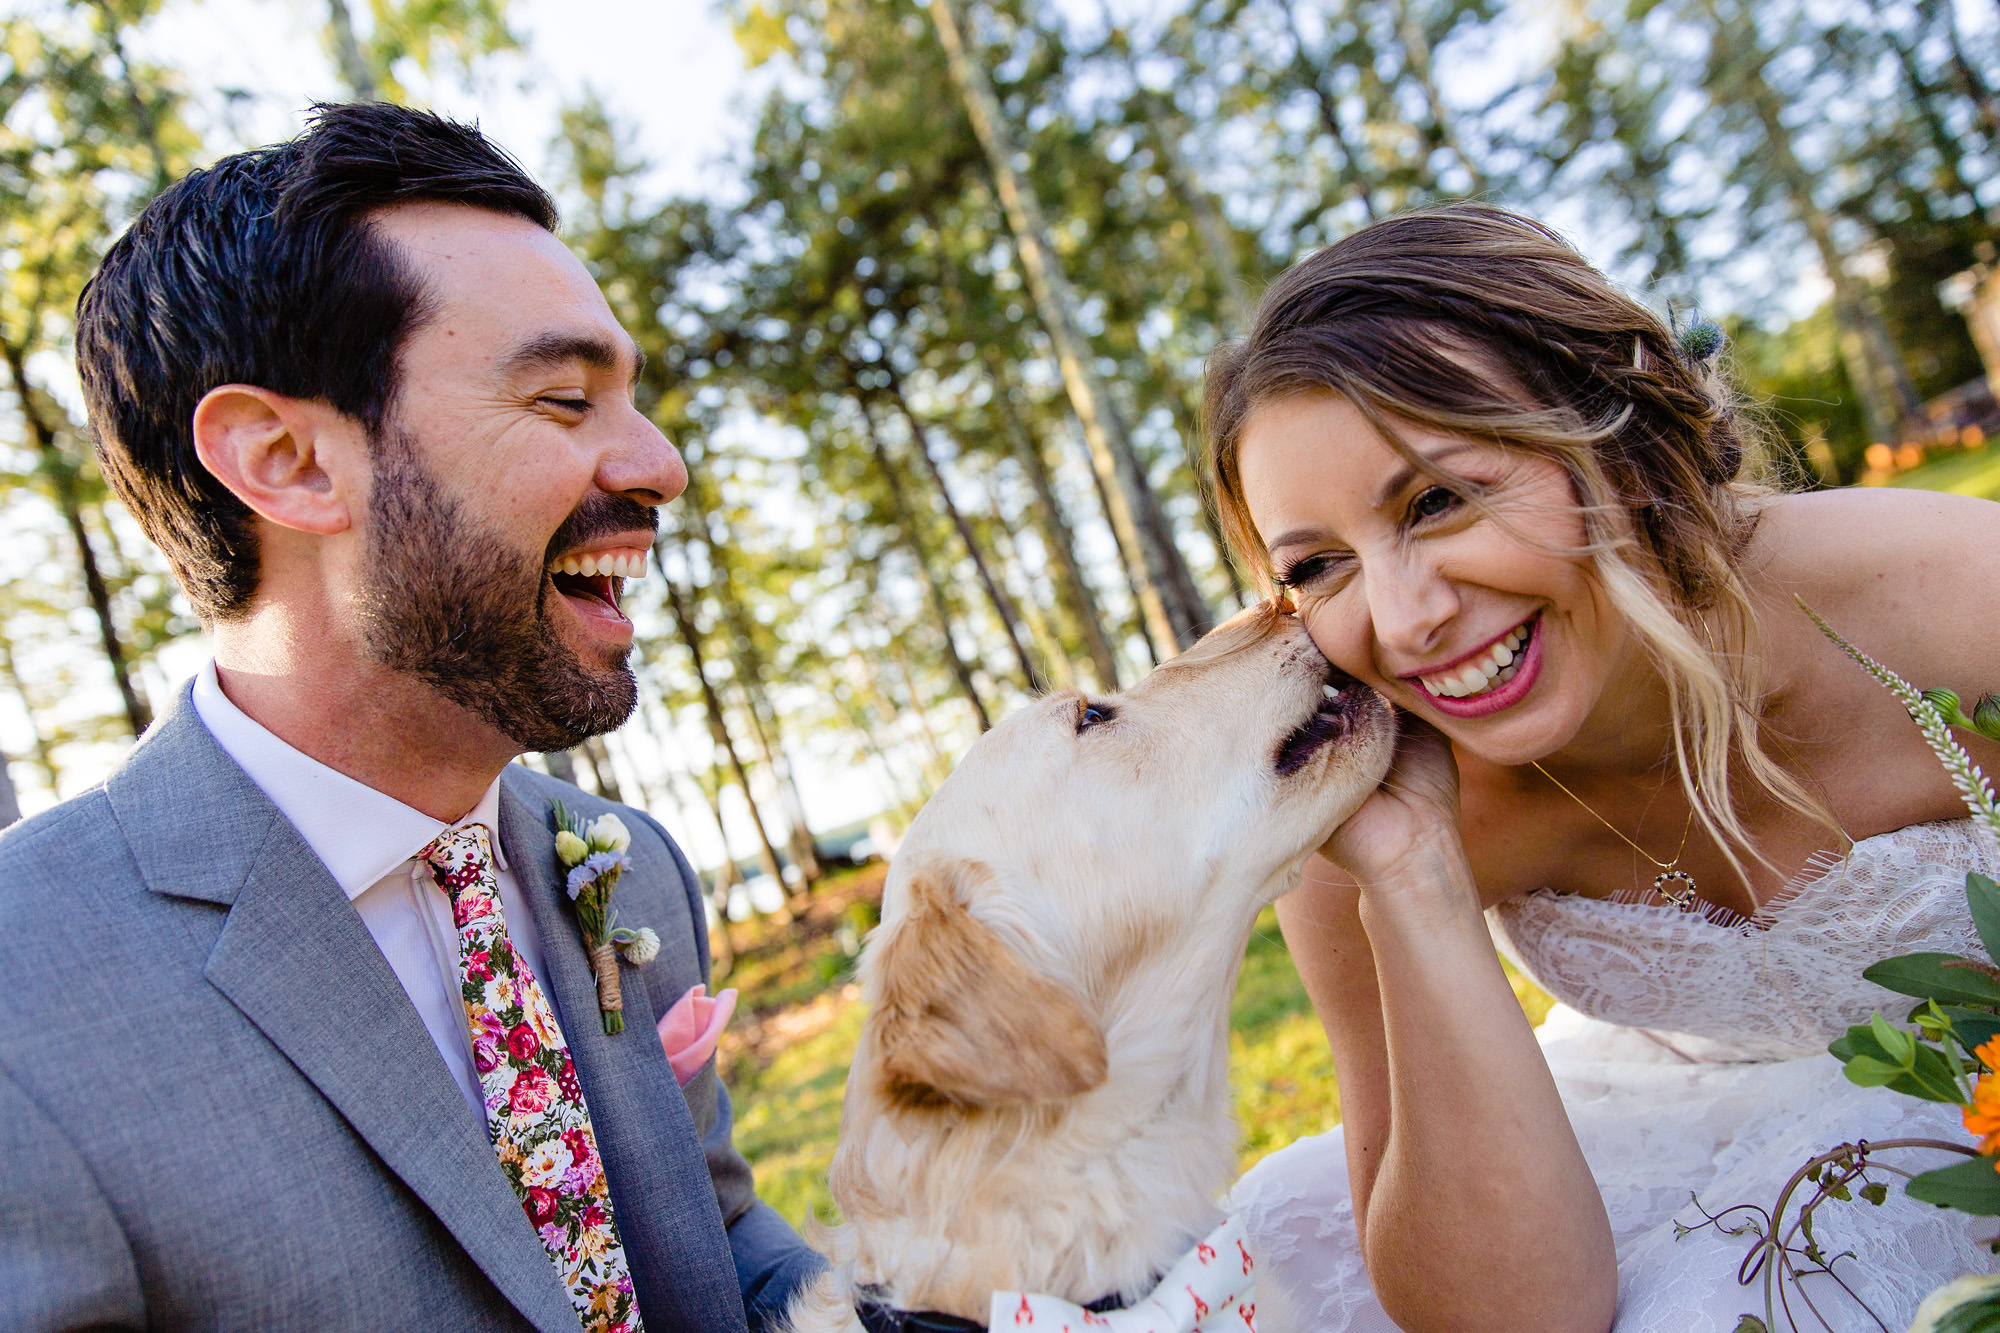 The bride and groom's dog kisses the bride at their Maine wedding